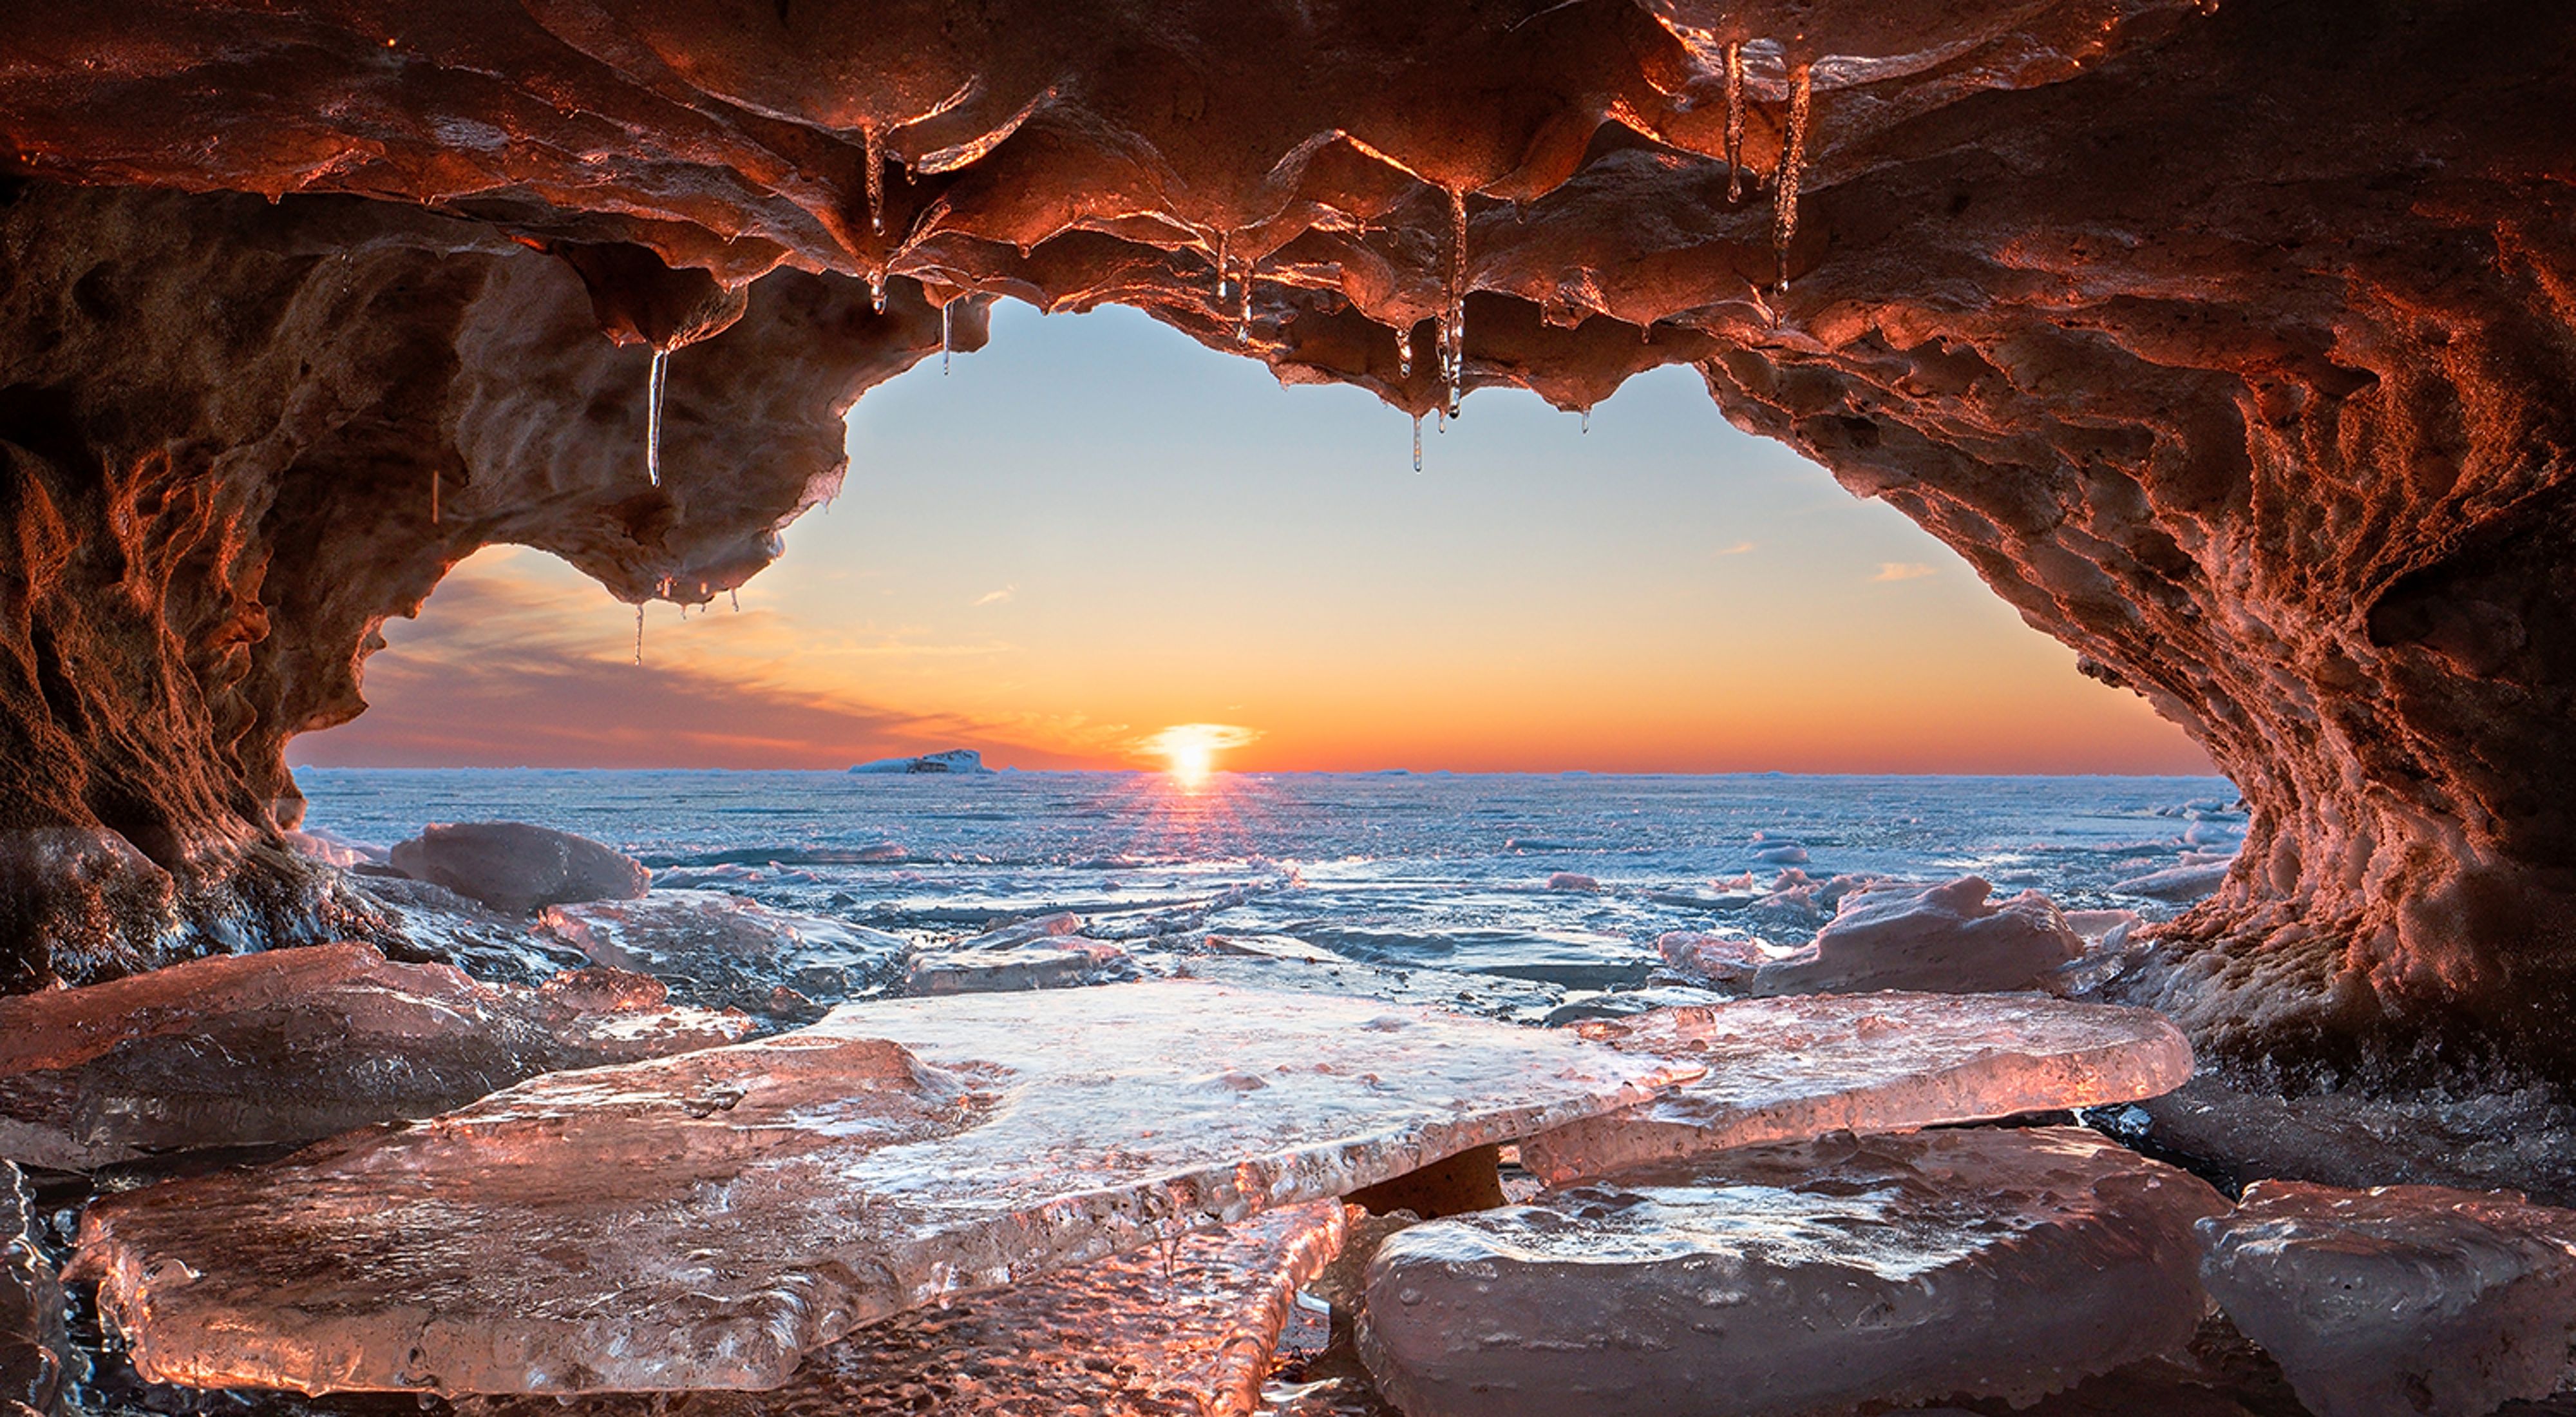 A small inlet within an ice shelf along the shoreline of Lake Michigan.